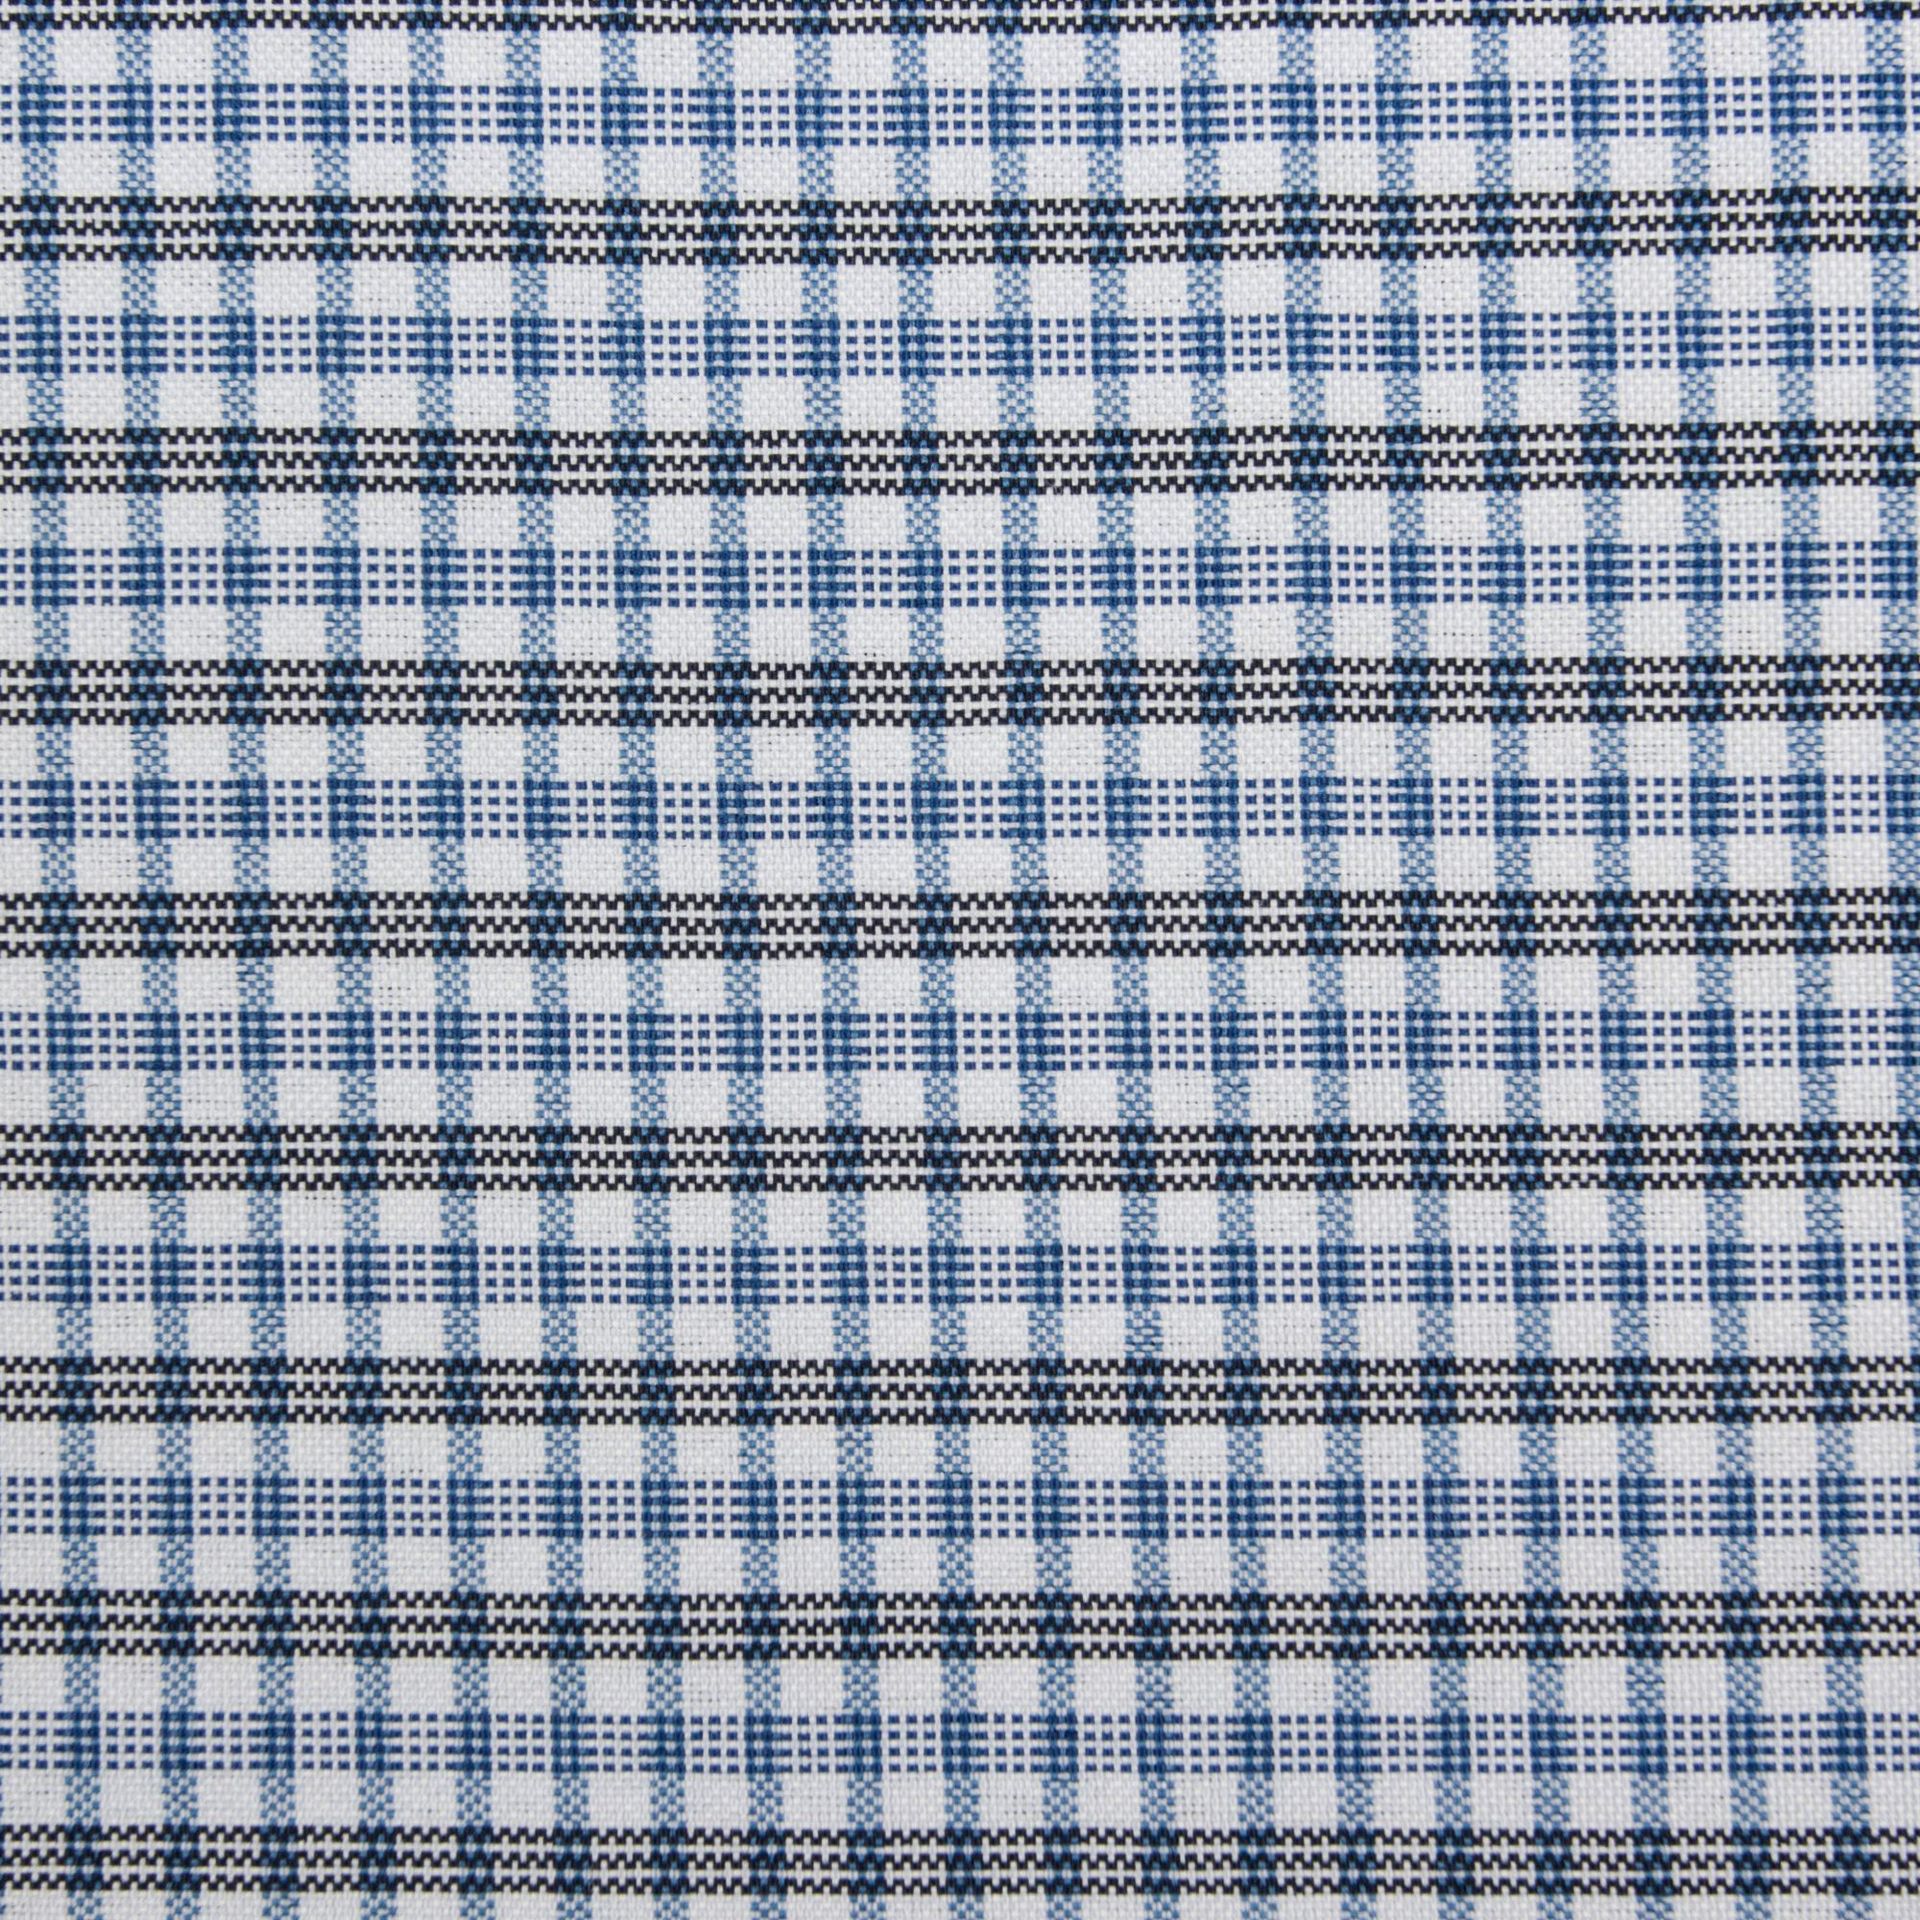 Yarn-Dyed Shirt's Fabric Plaid Clothing Fabric Can Be Sample Production and Processing Price Can Be Discussed